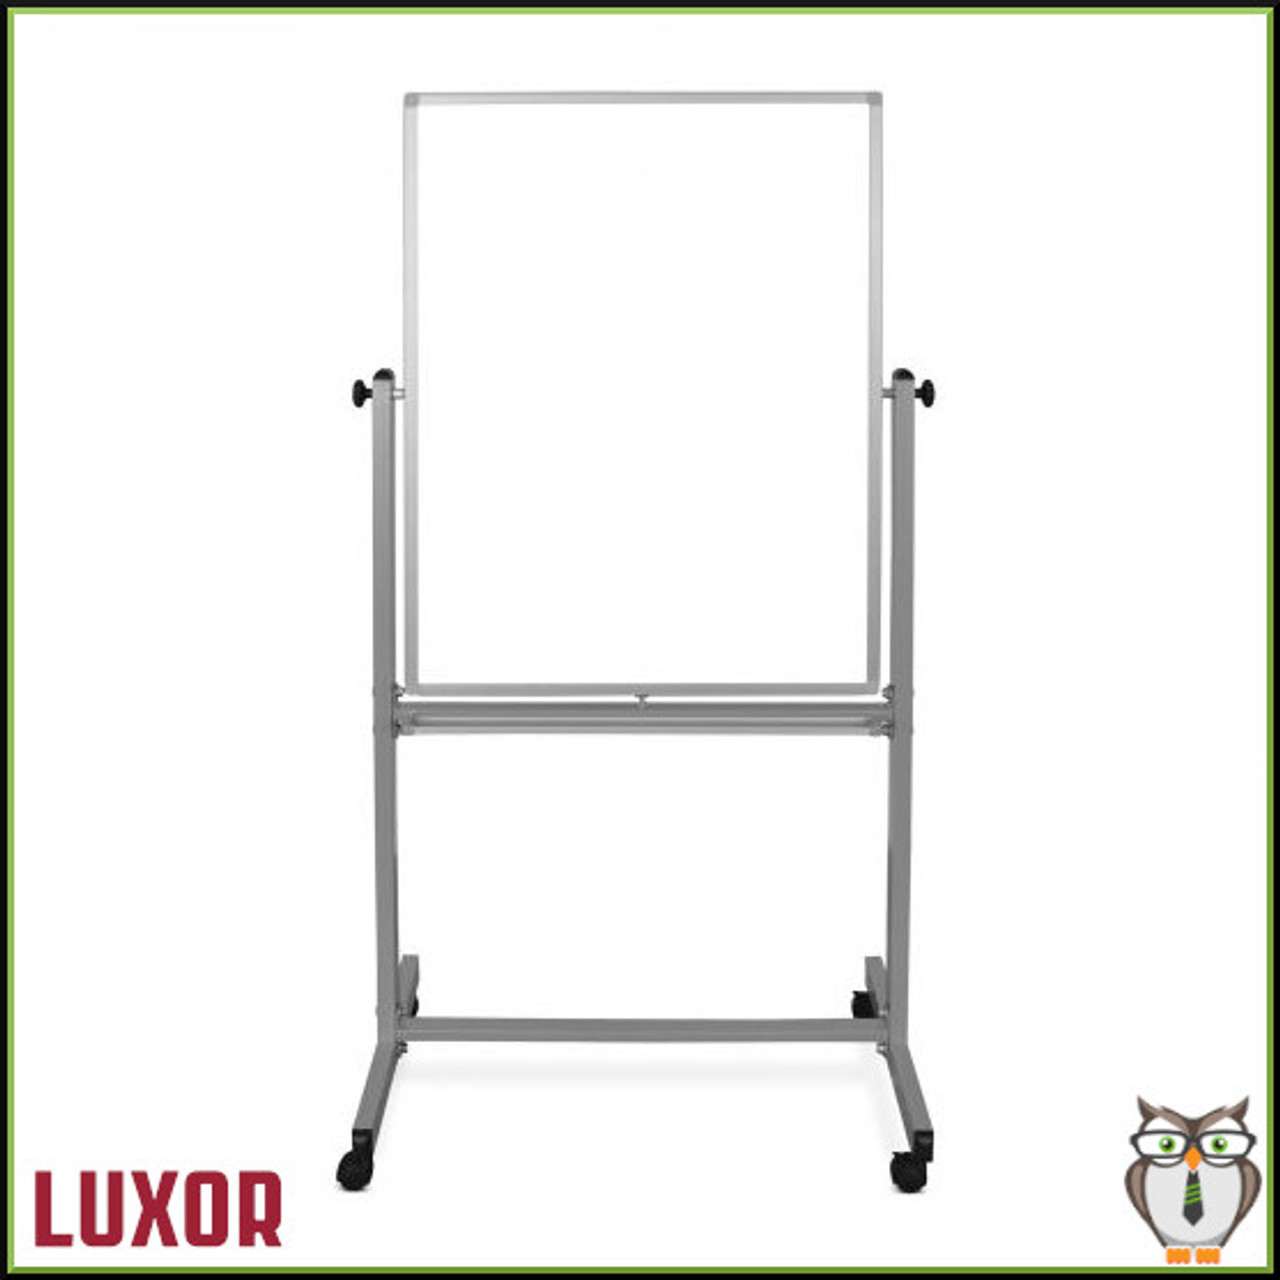 Luxor 30"W x 40"H Double-Sided Magnetic Whiteboard (MB3040WW) - Front